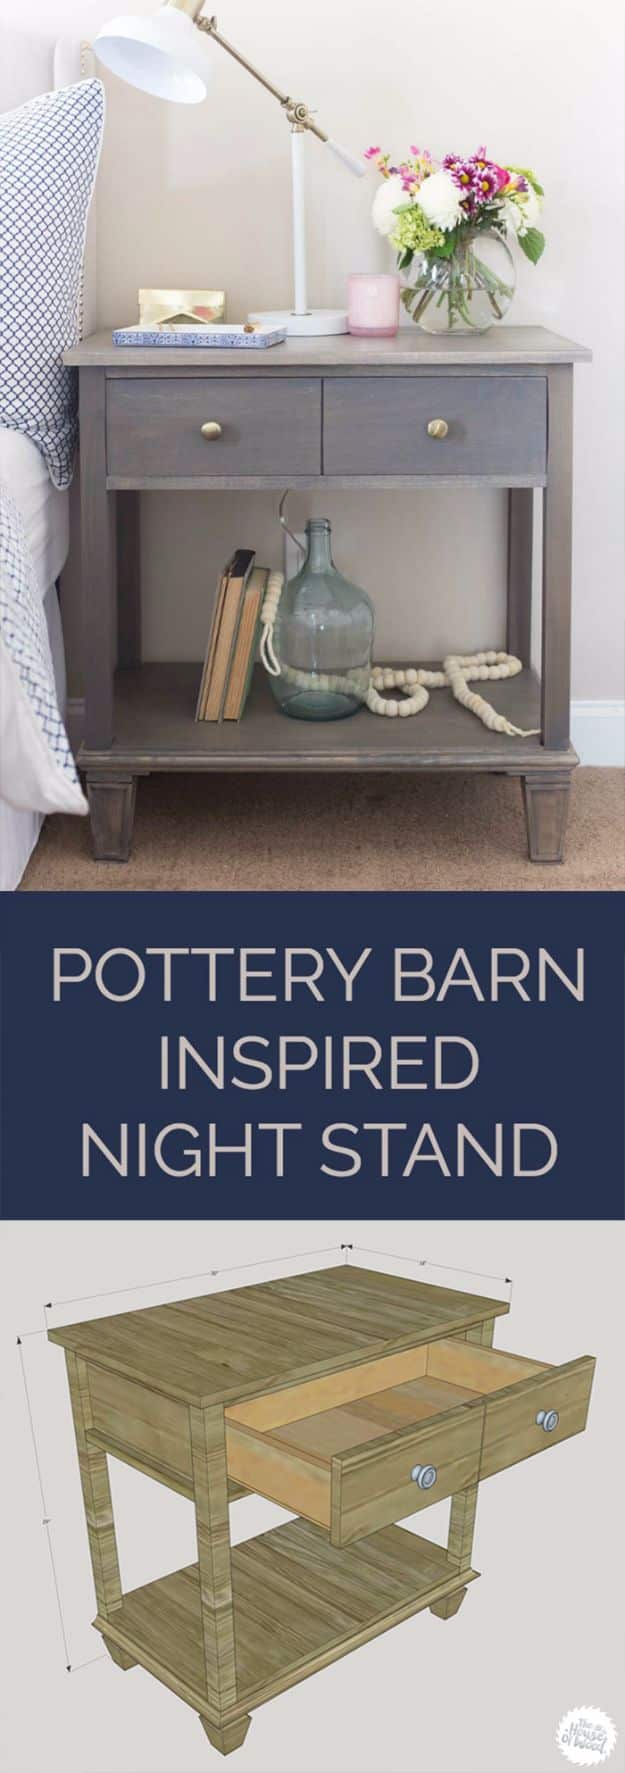 DIY Nightstands for the Bedroom - DIY Pottery Barn Inspired Nightstand - Easy Do It Yourself Bedside Tables and Furniture Project Ideas - Thrift Store Makeovers For Your Room and Bed Side Night Stand - Storage for Books and Remotes, Cute Shabby Chic and Vintage Decor - Step by Step Tutorials and Instructions http://diyjoy.com/diy-nightstands-bedroom